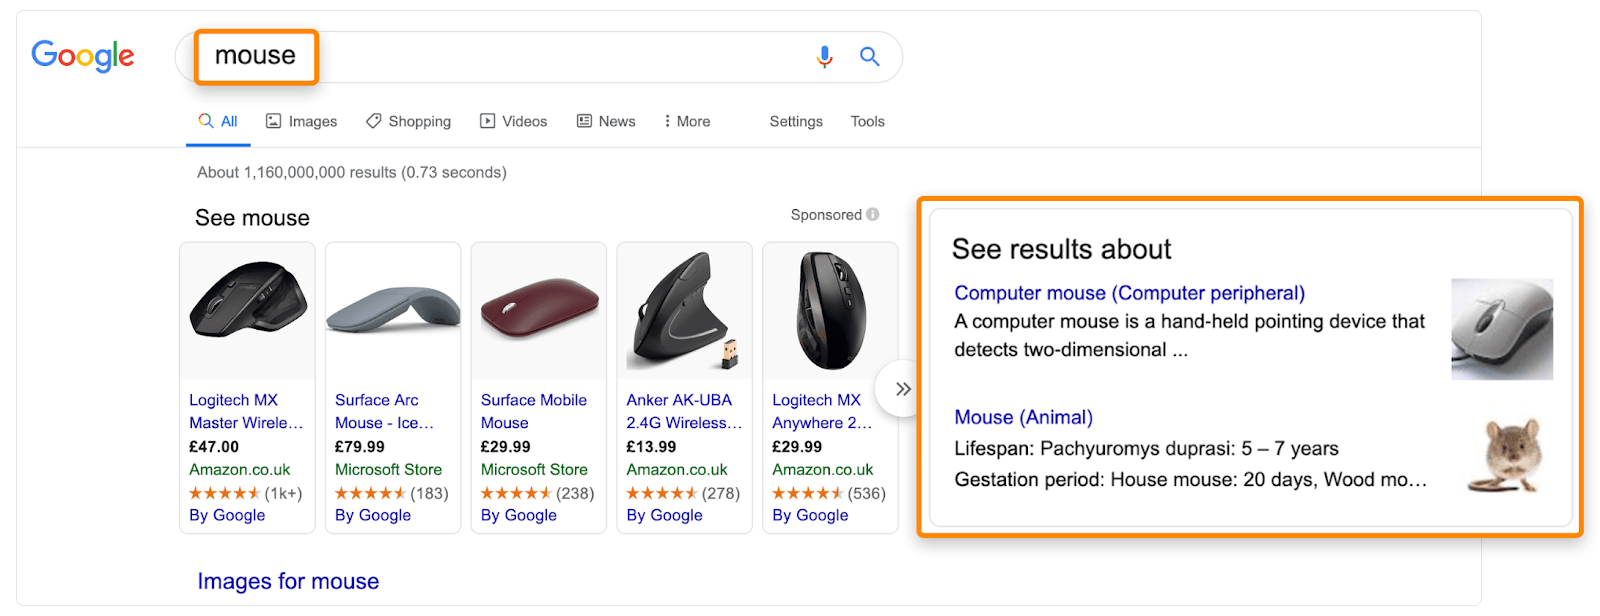 2 mouse knowledge graph 1